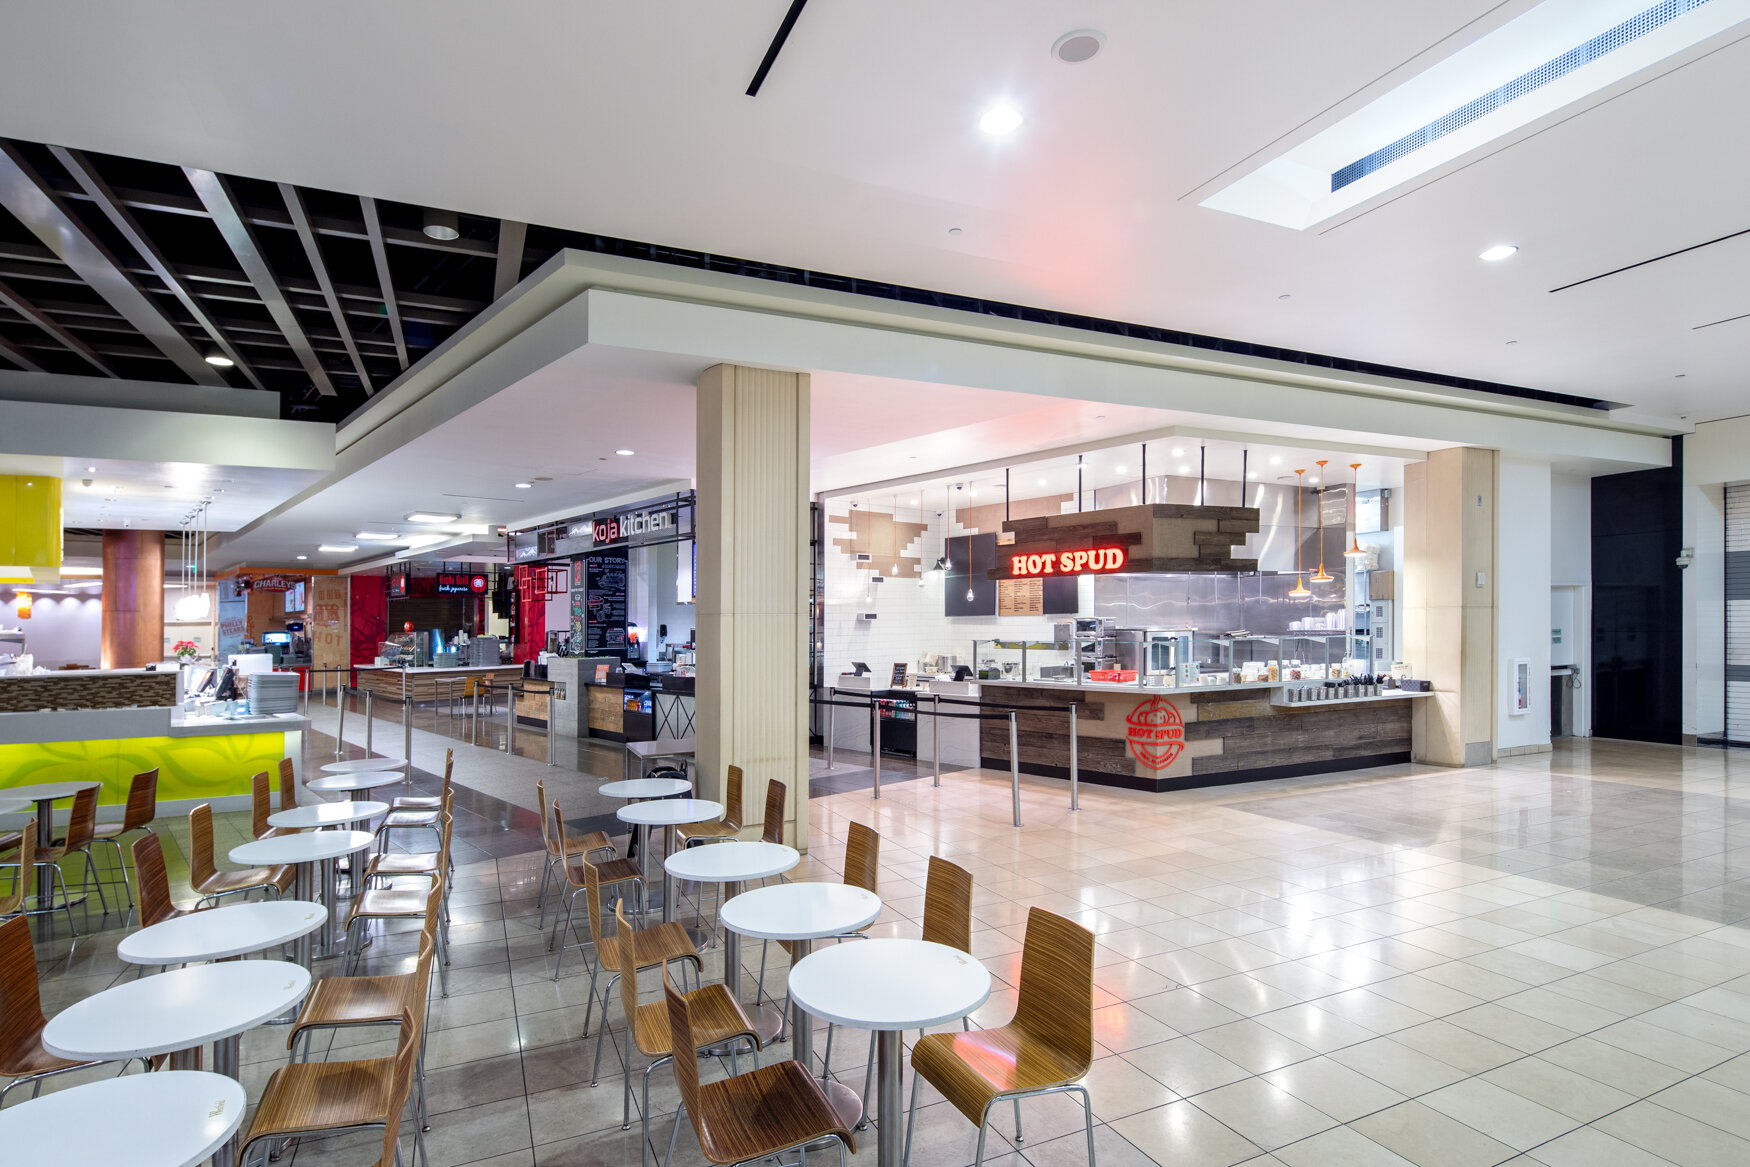 Hot Spud retail interiors by brightroomSF Interior photograohy-1.jpg